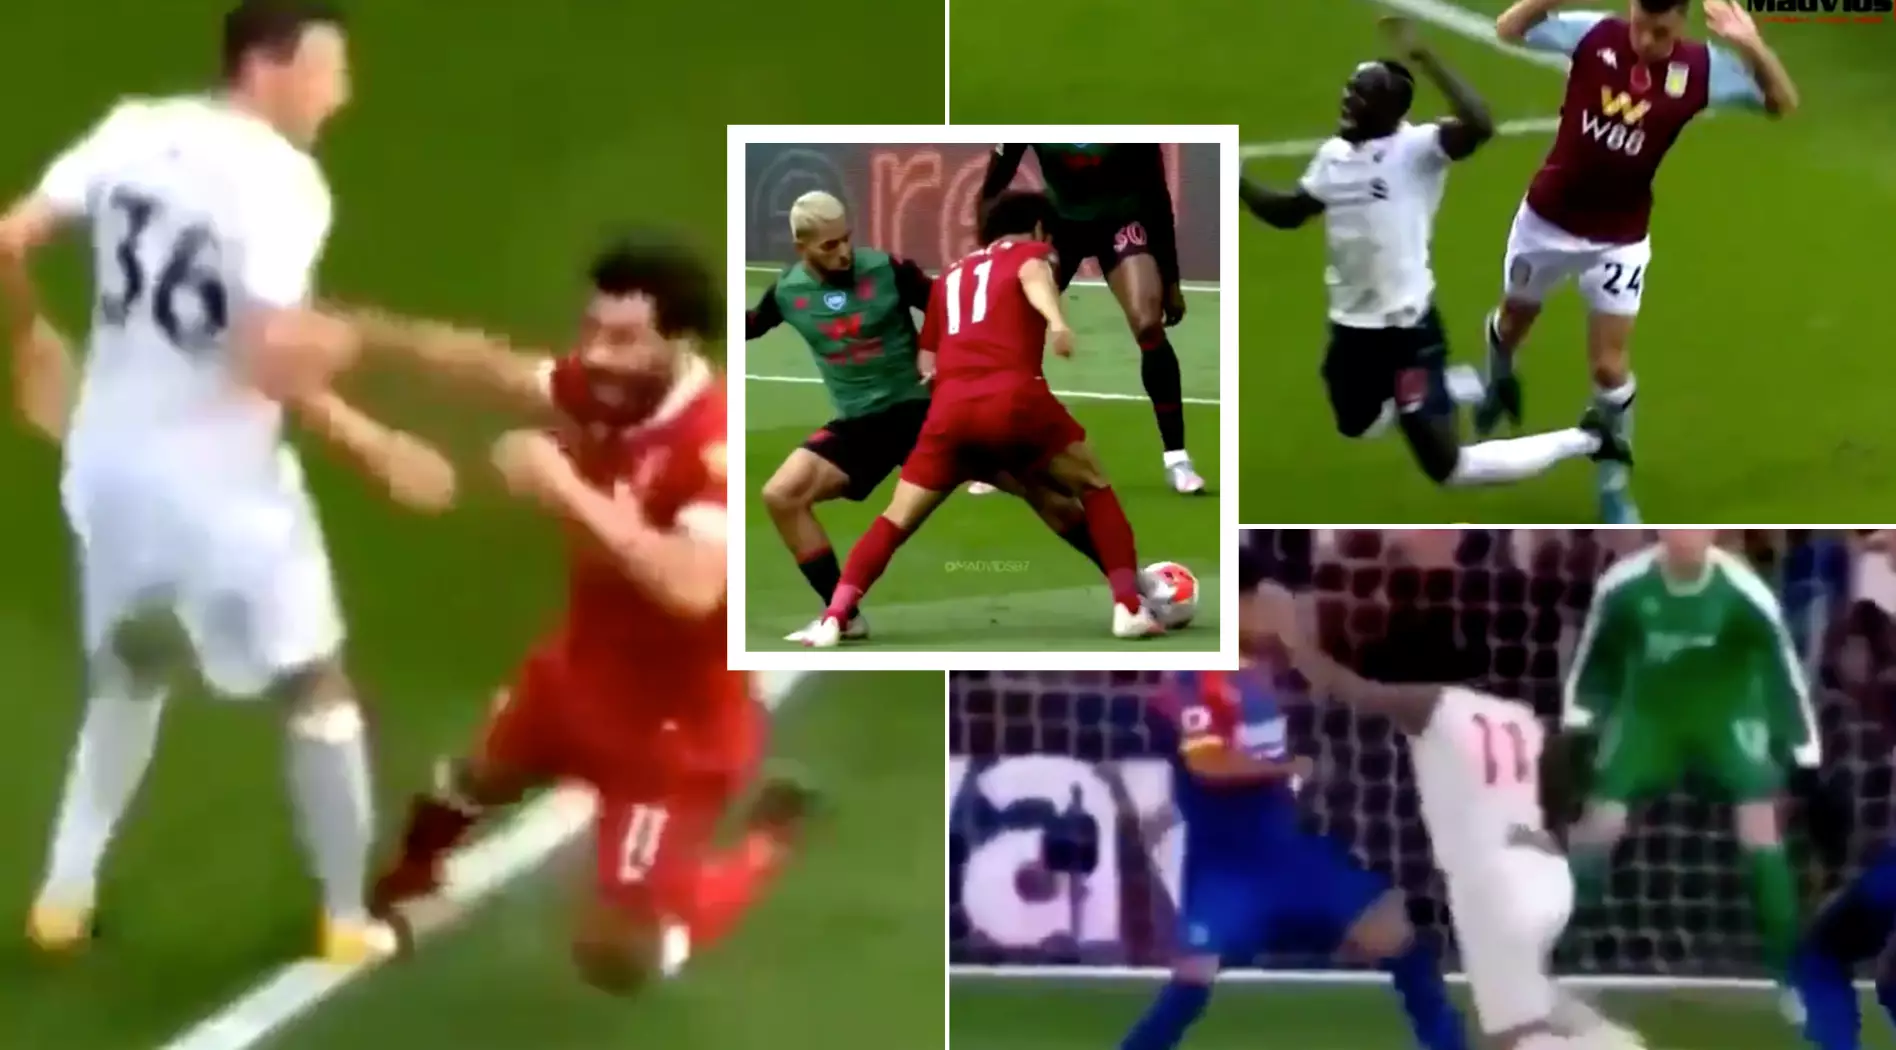 Manchester United Fan Puts Together Video Compilation Of Mohamed Salah And Sadio Mane Theatrics For Liverpool